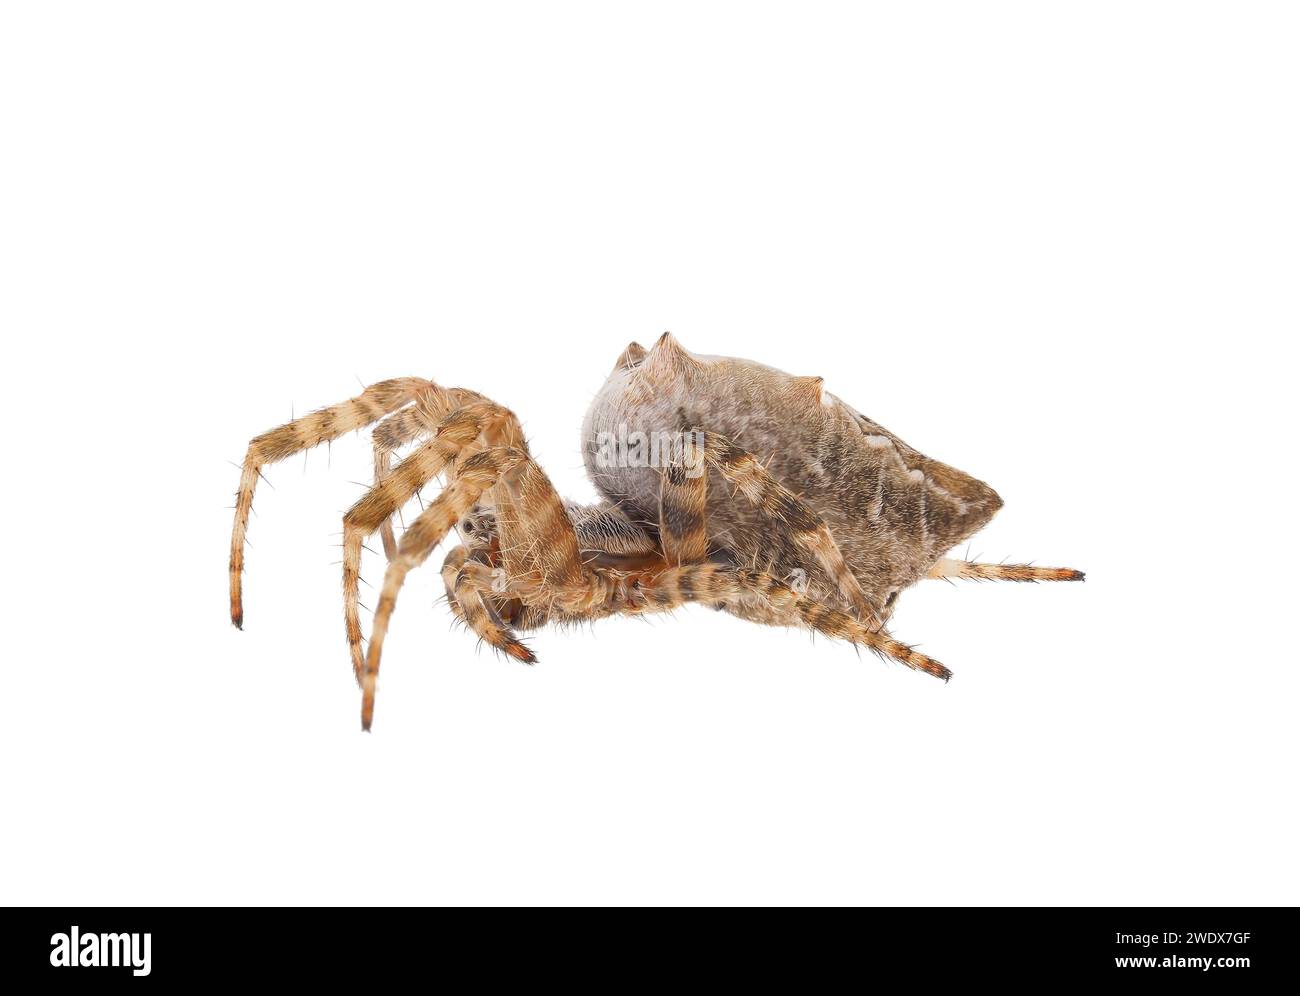 Brown tropical tent-web spider isolated on white background, Cyrtophora citricola Stock Photo